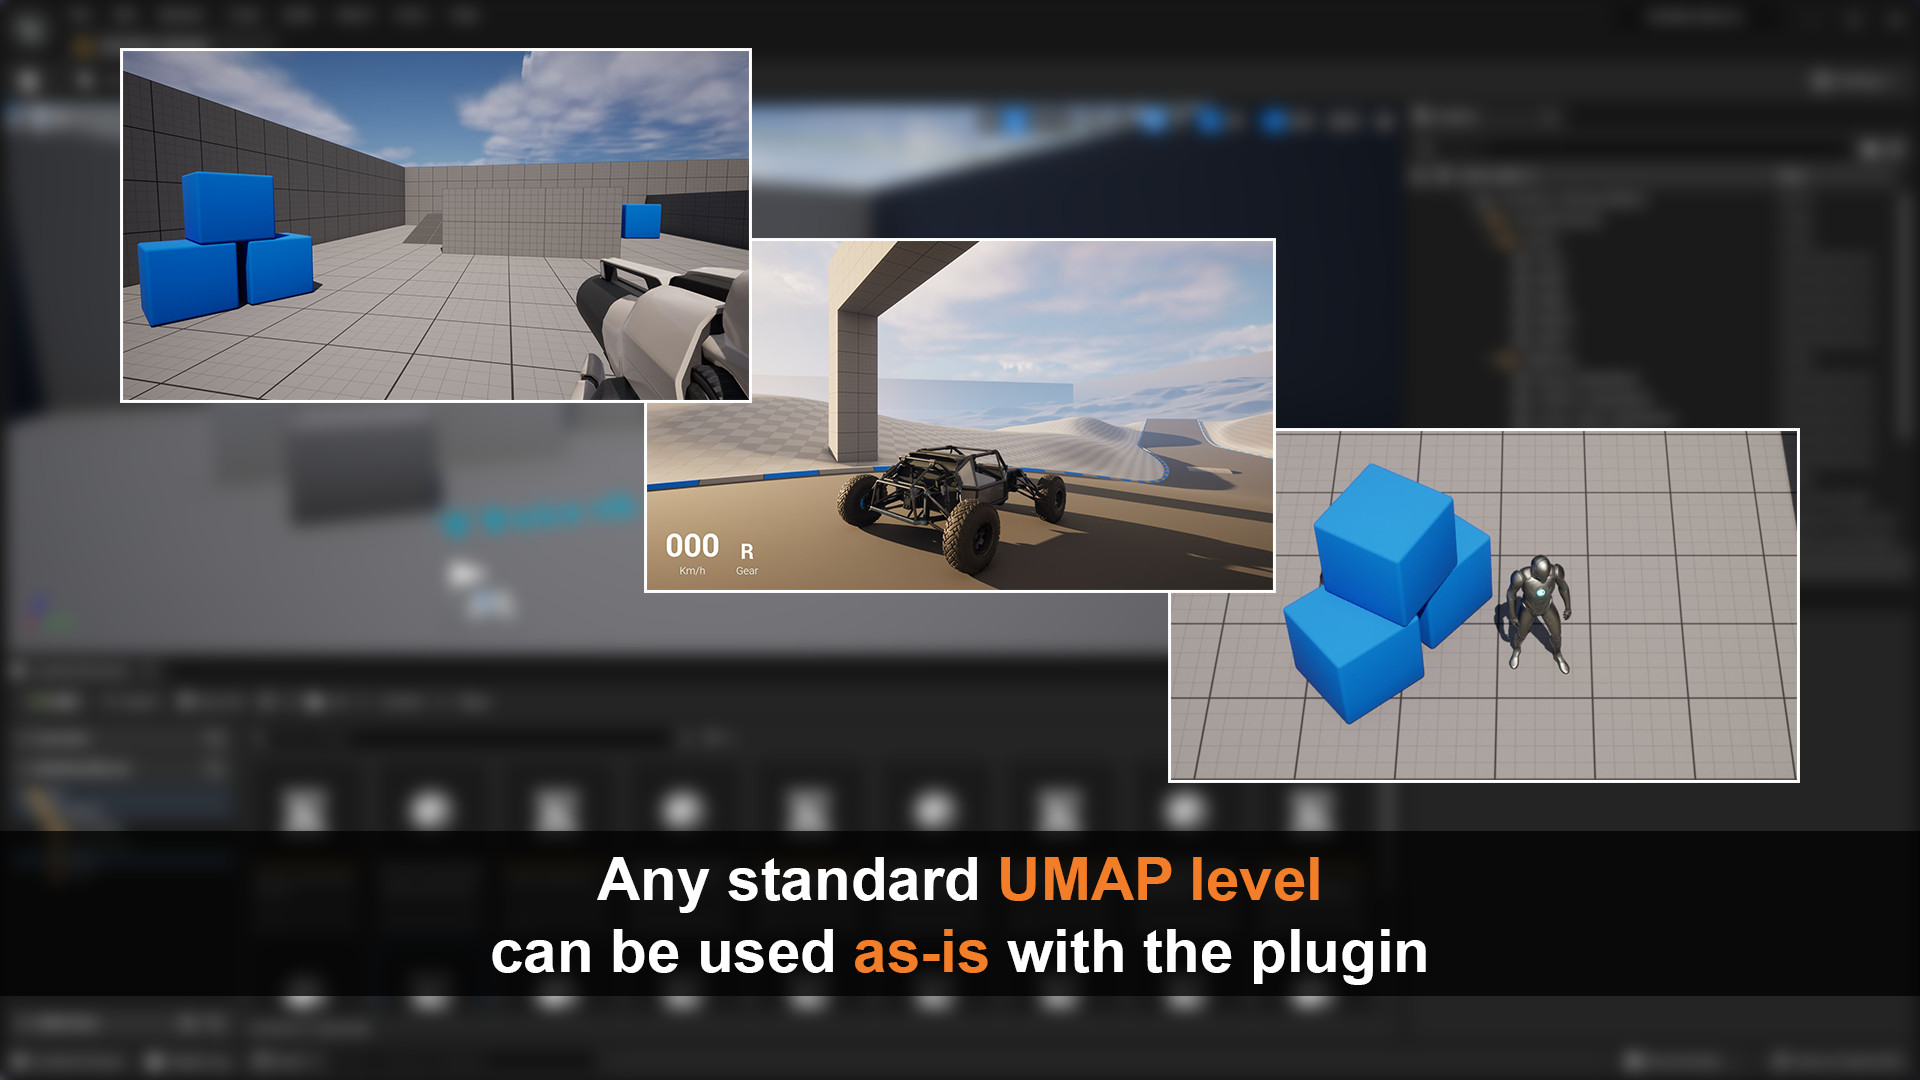 Any standard UMAP level can be used as-is with the plugin